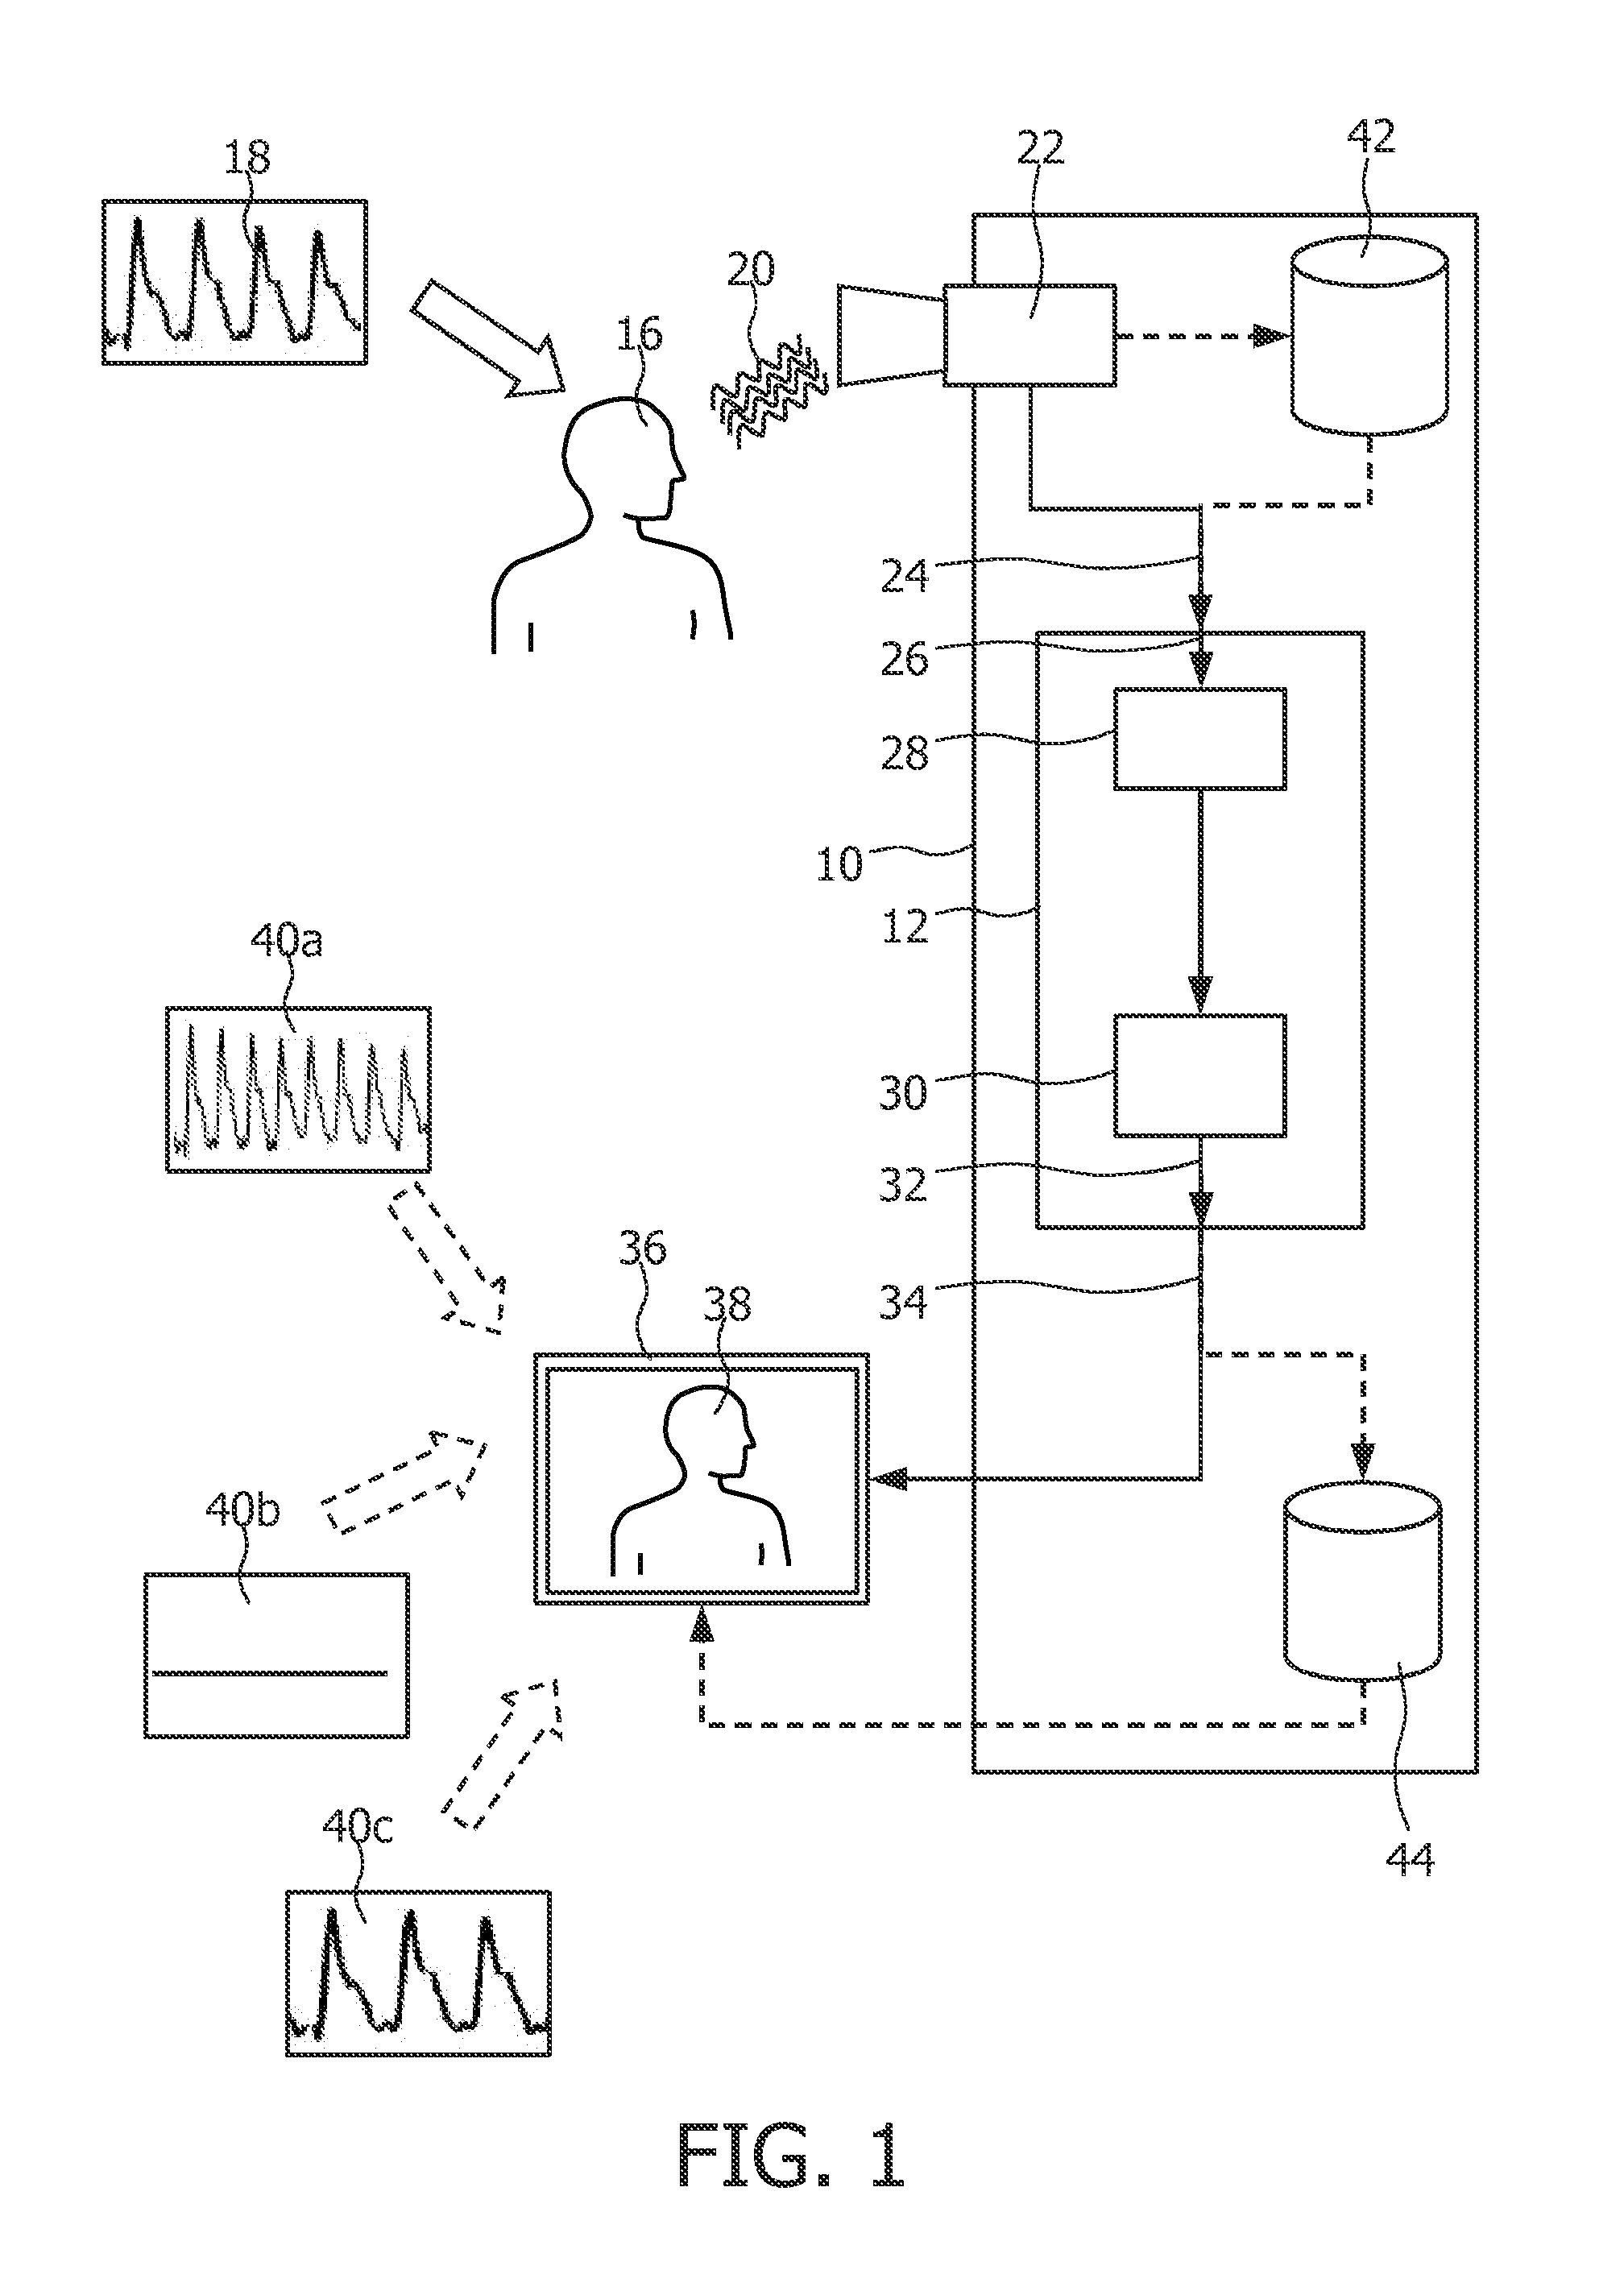 System and method for converting an input signal into an output signal